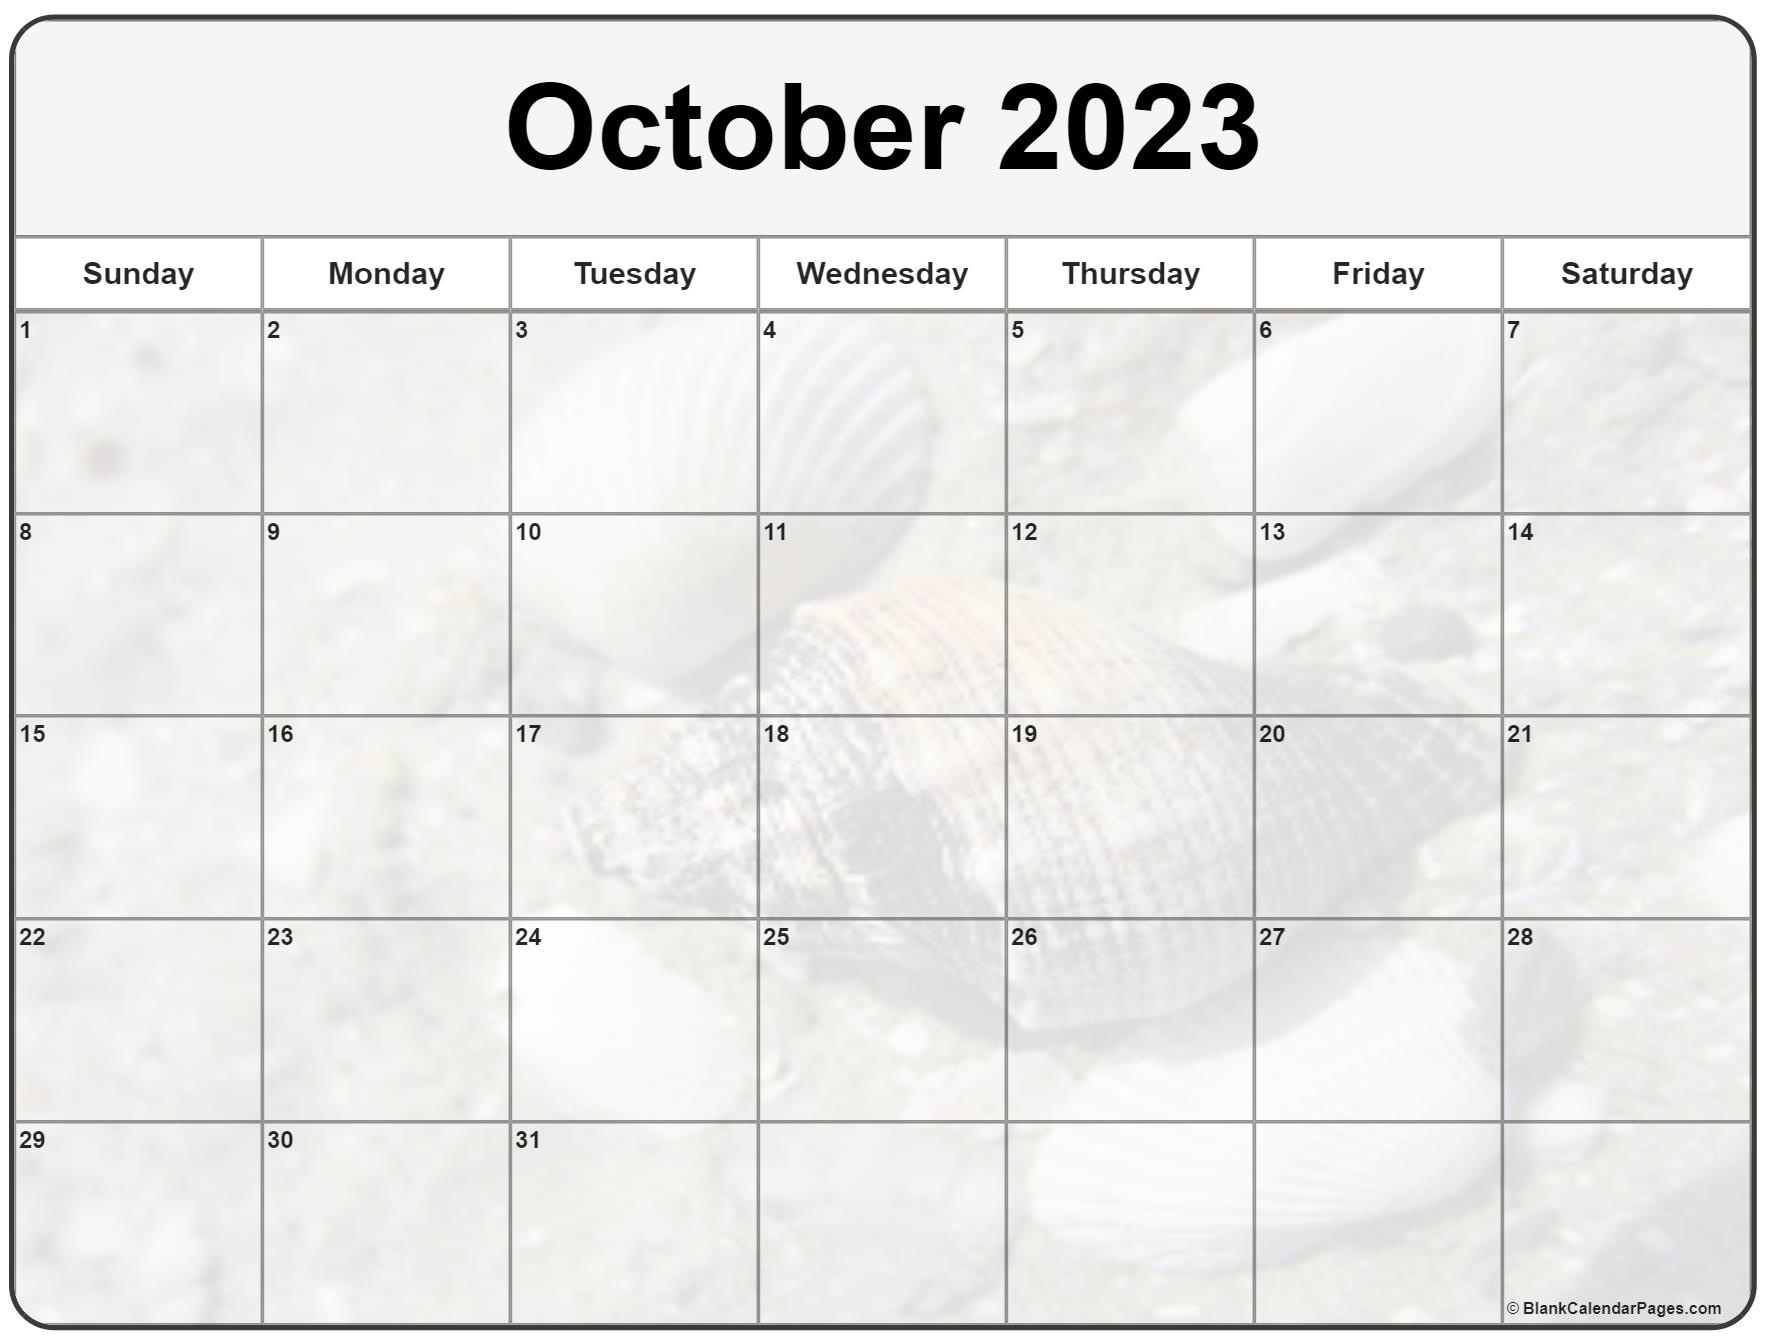 collection-of-october-2023-photo-calendars-with-image-filters